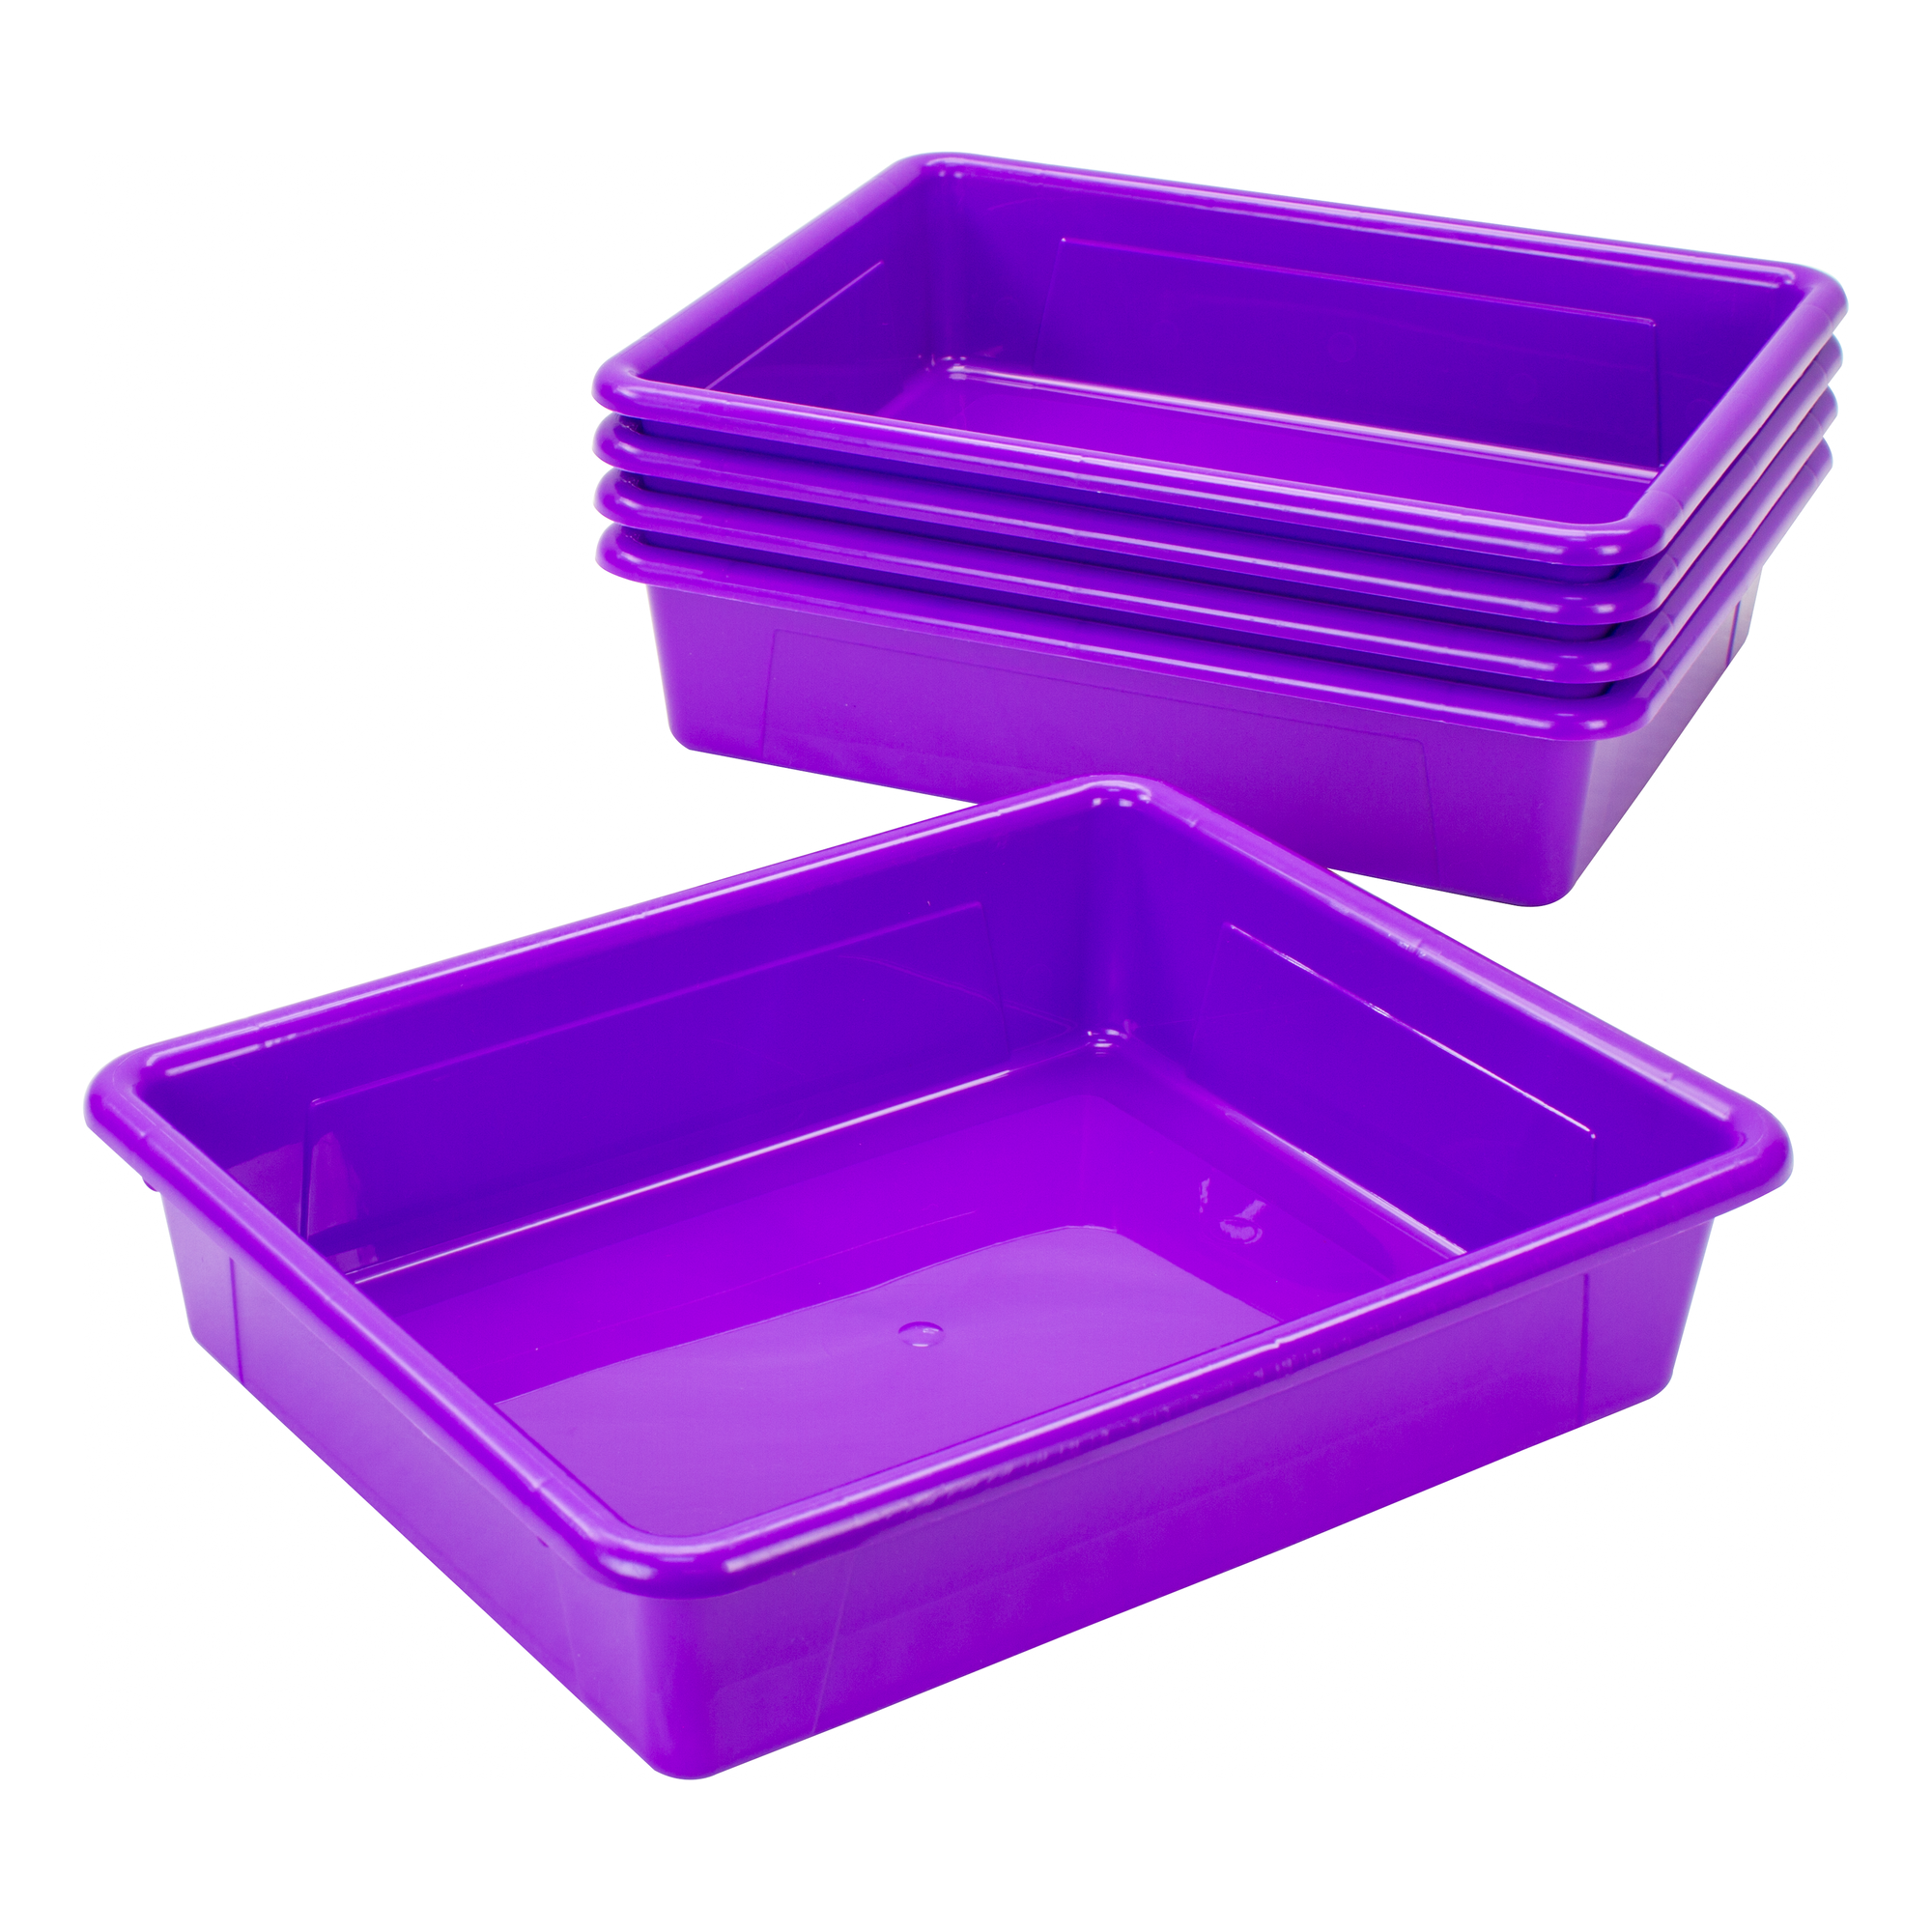 Storex Storage Tray, Letter Size, 10 x 13 x 3 Inches, Violet, 5-Pack